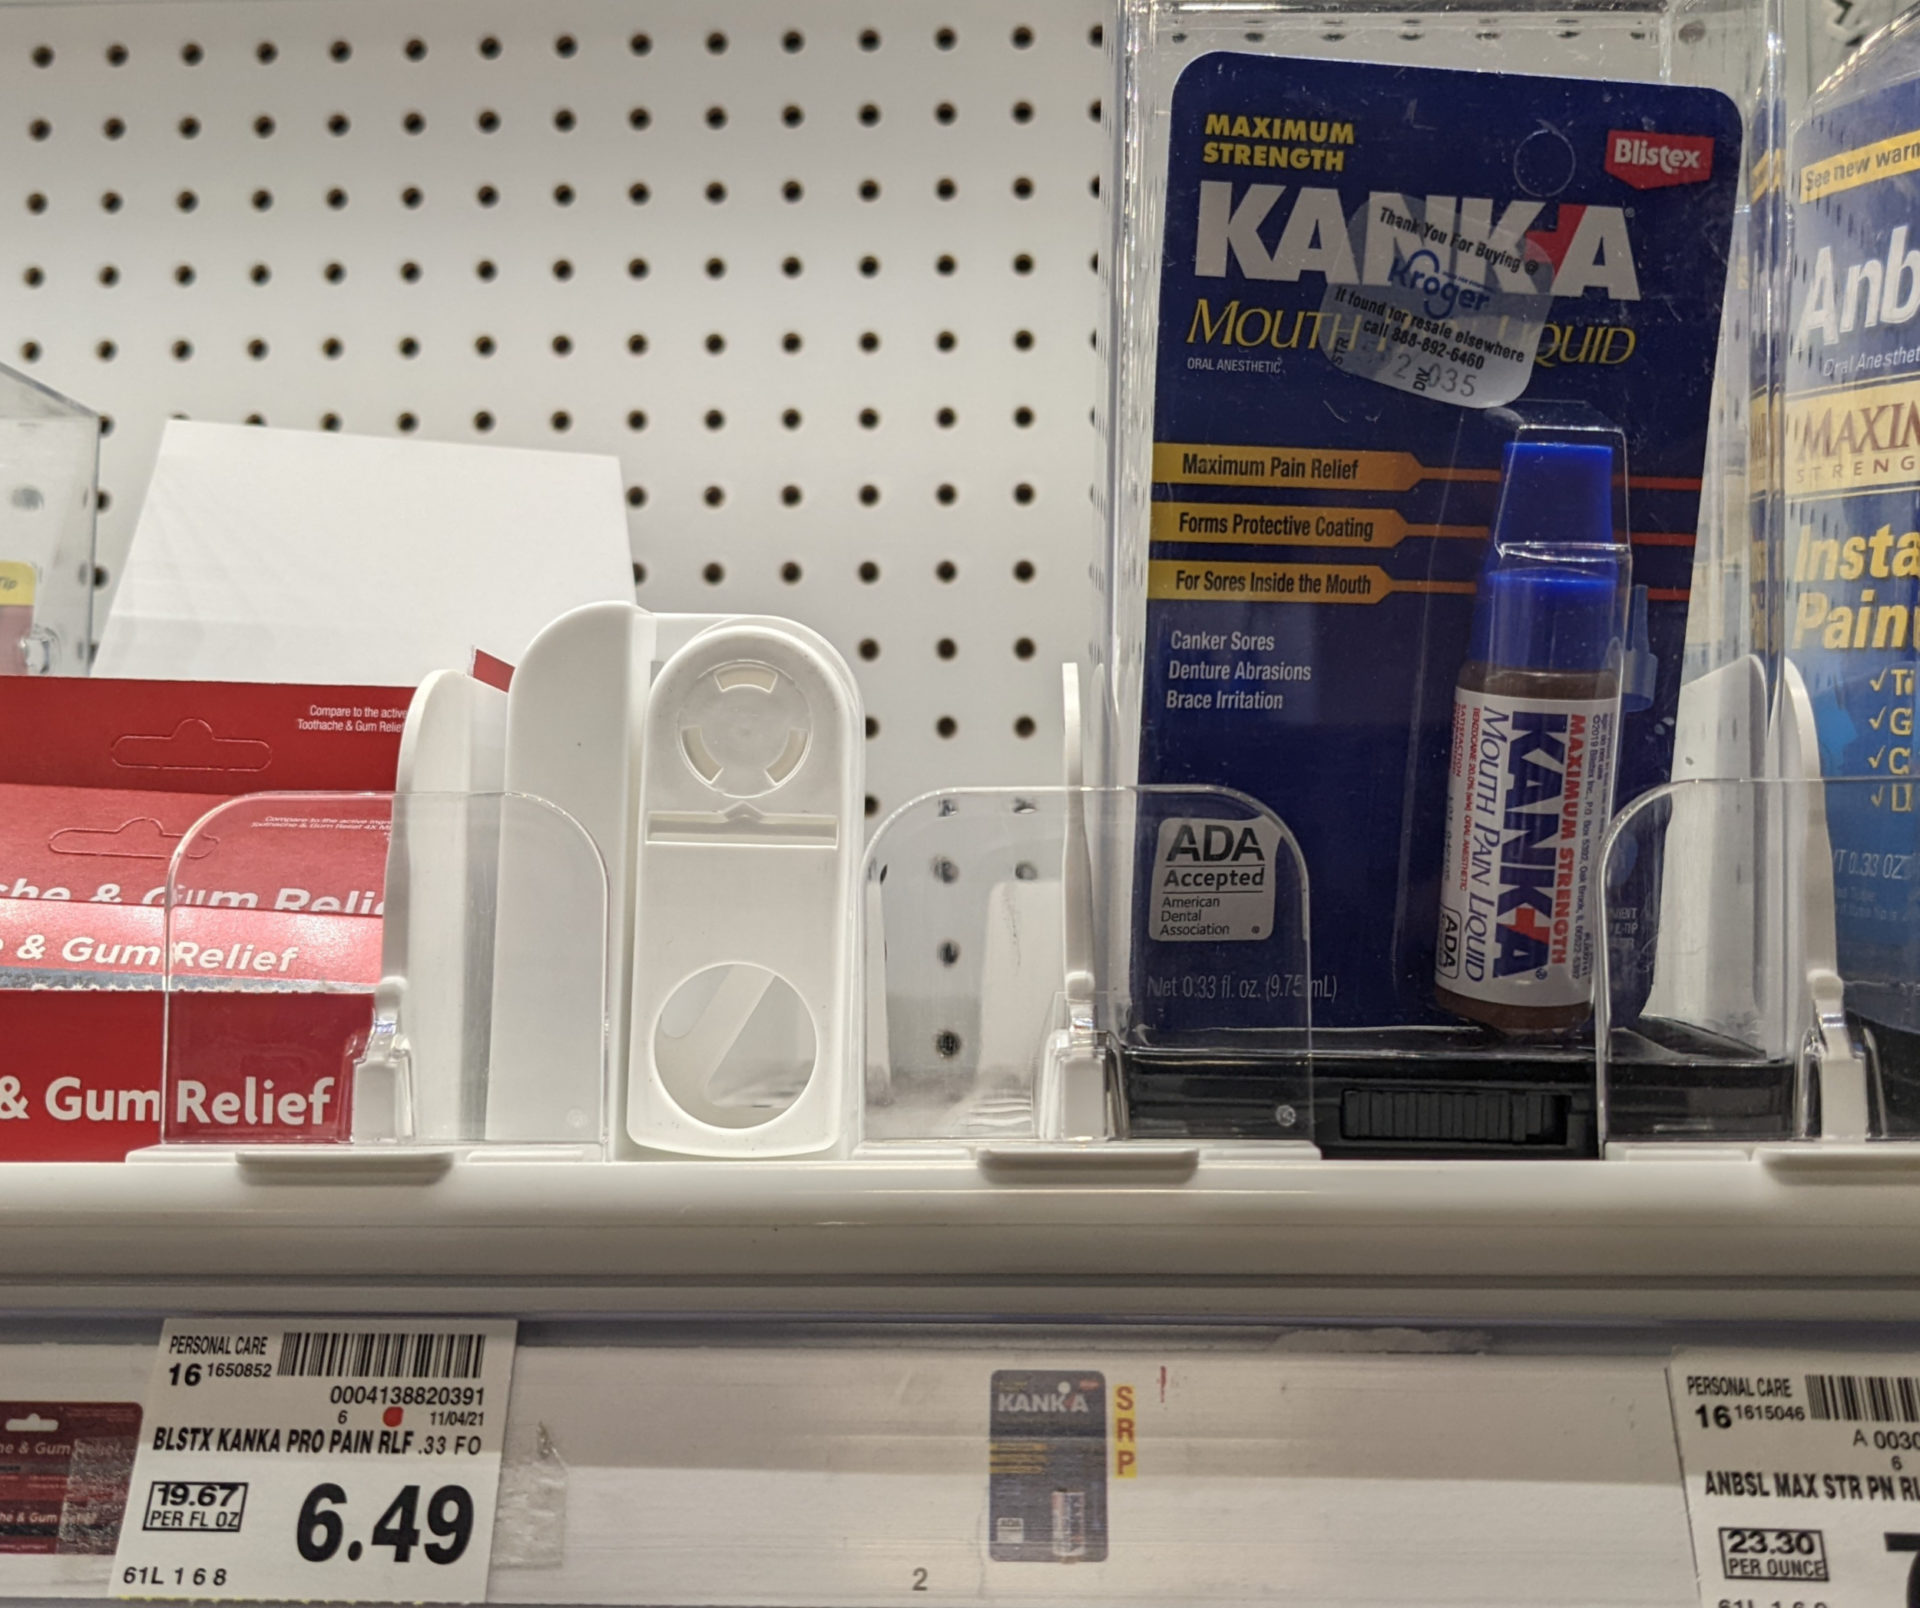 Get Kank-A Mouth Pain Liquid Relief For As Low As $2.49 At Kroger 1